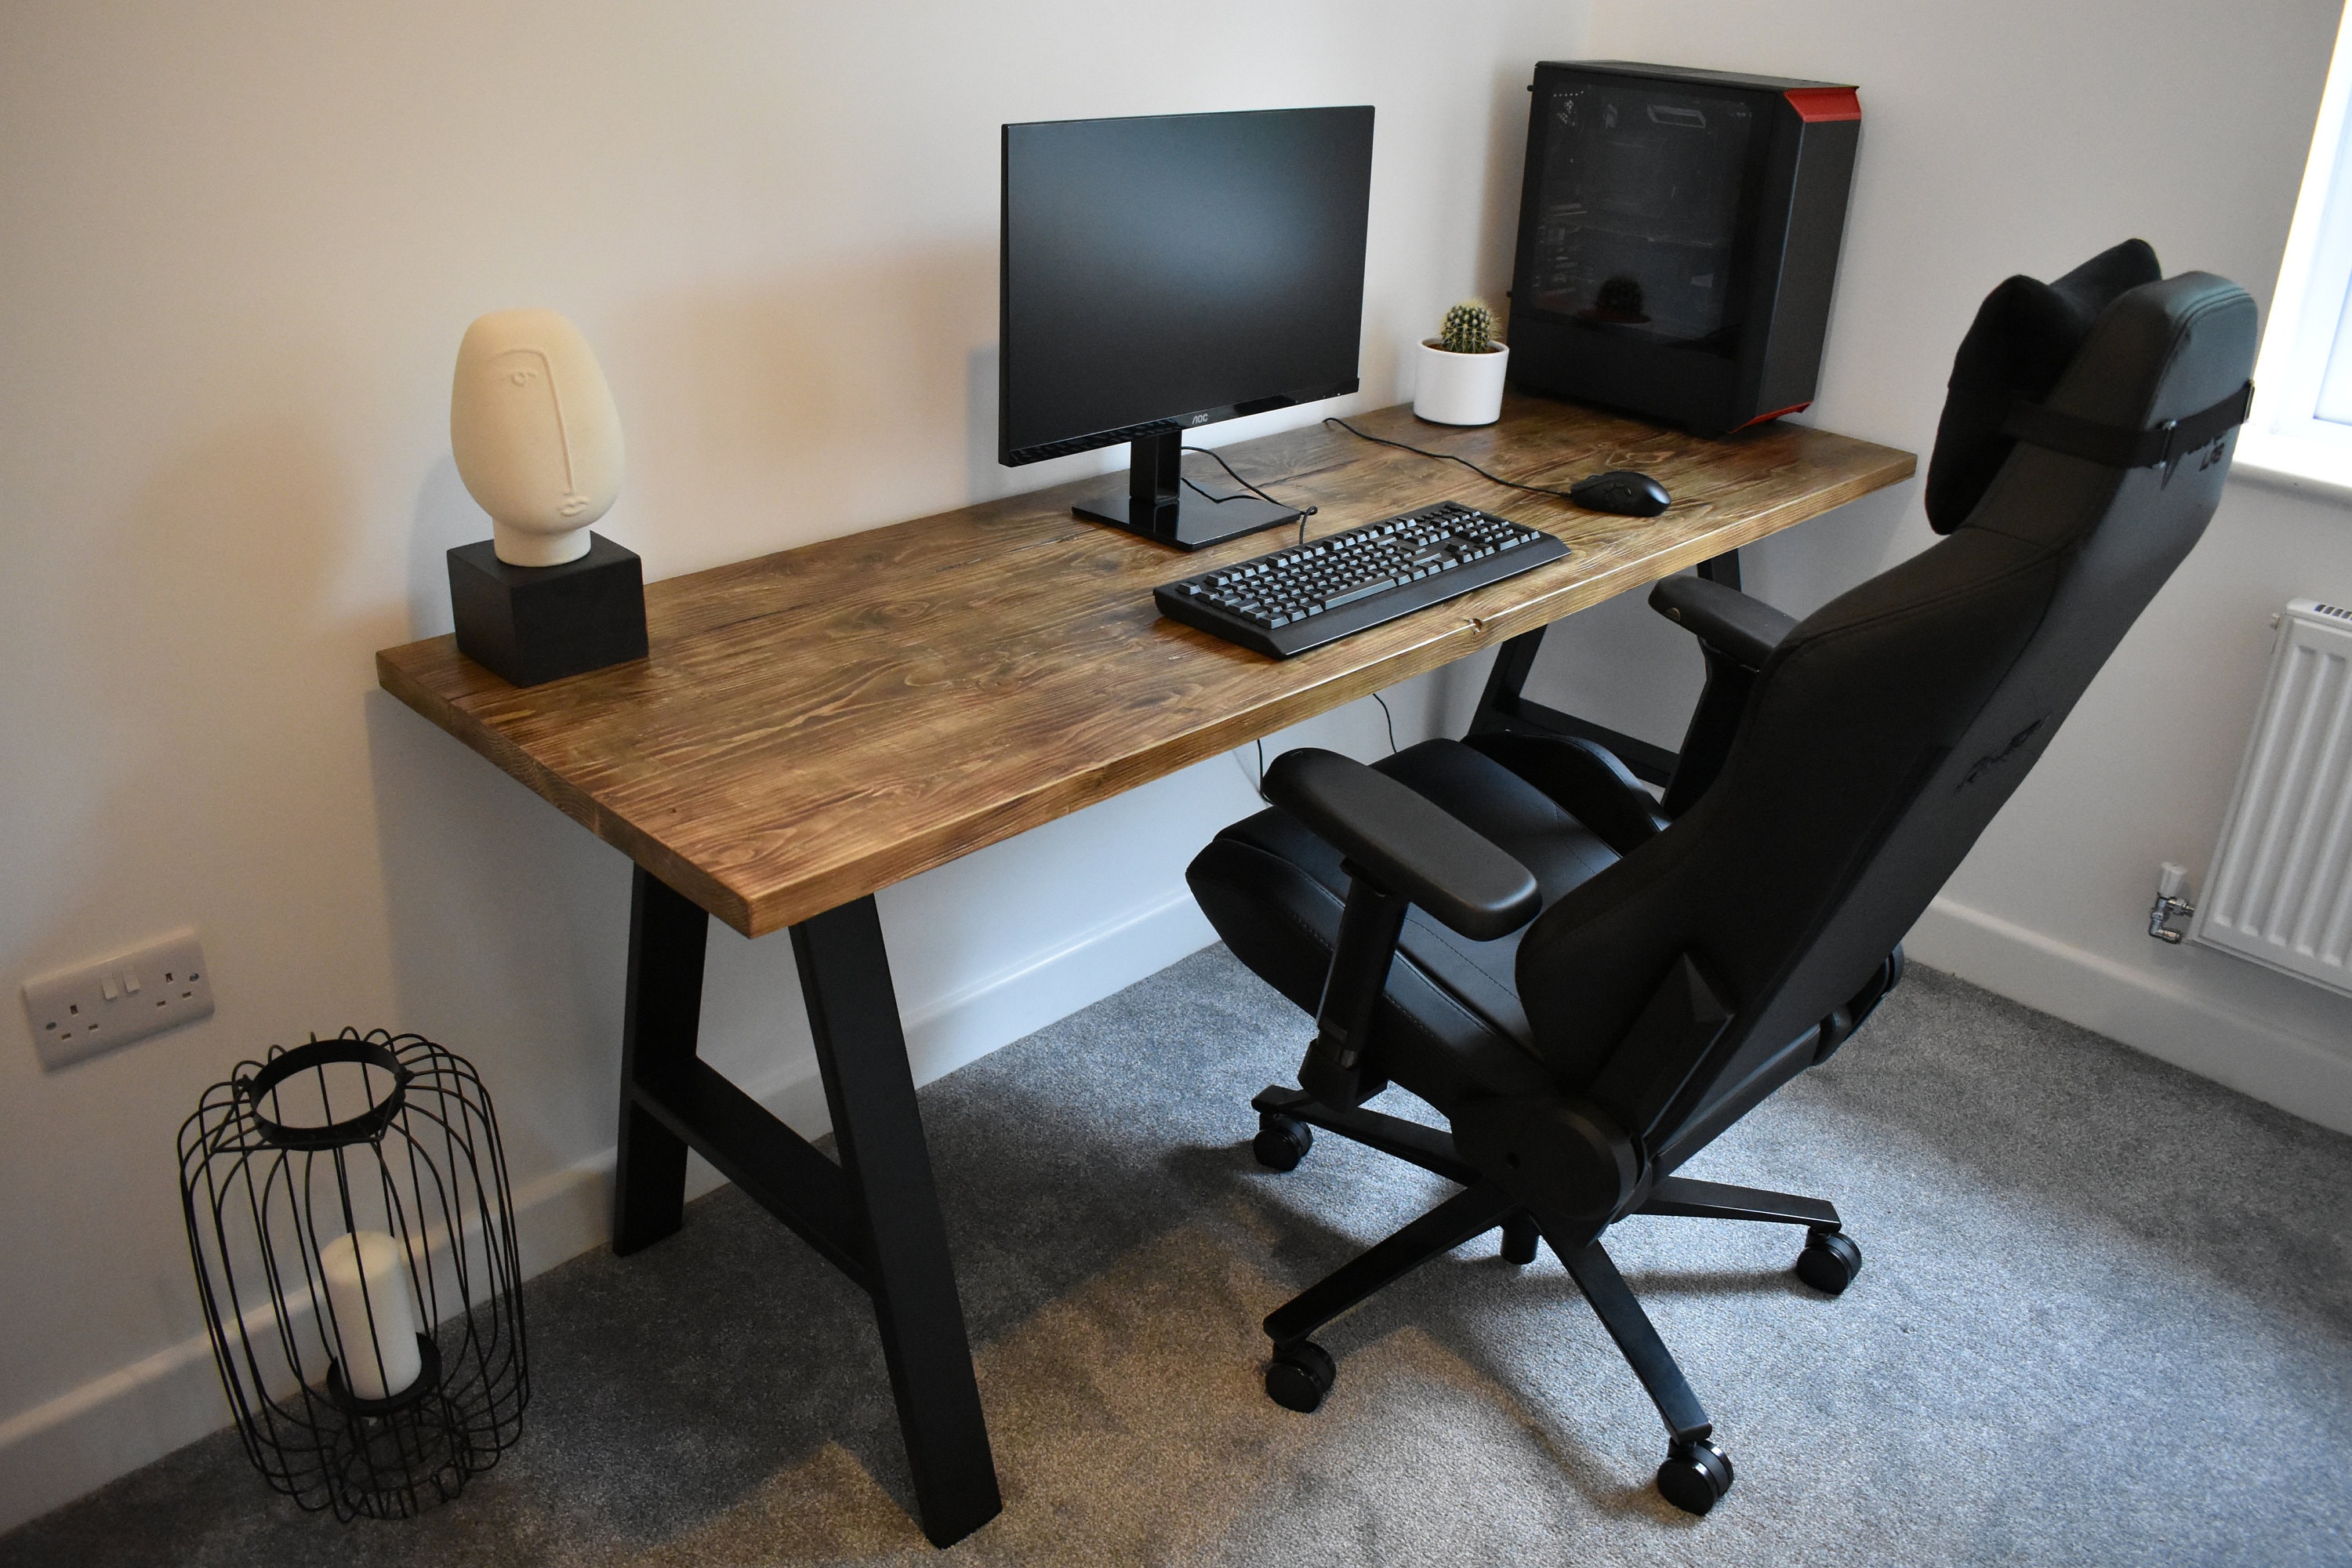 The GG Gaming Desk Rustic Meets Industrial Solid Wood - Etsy UK